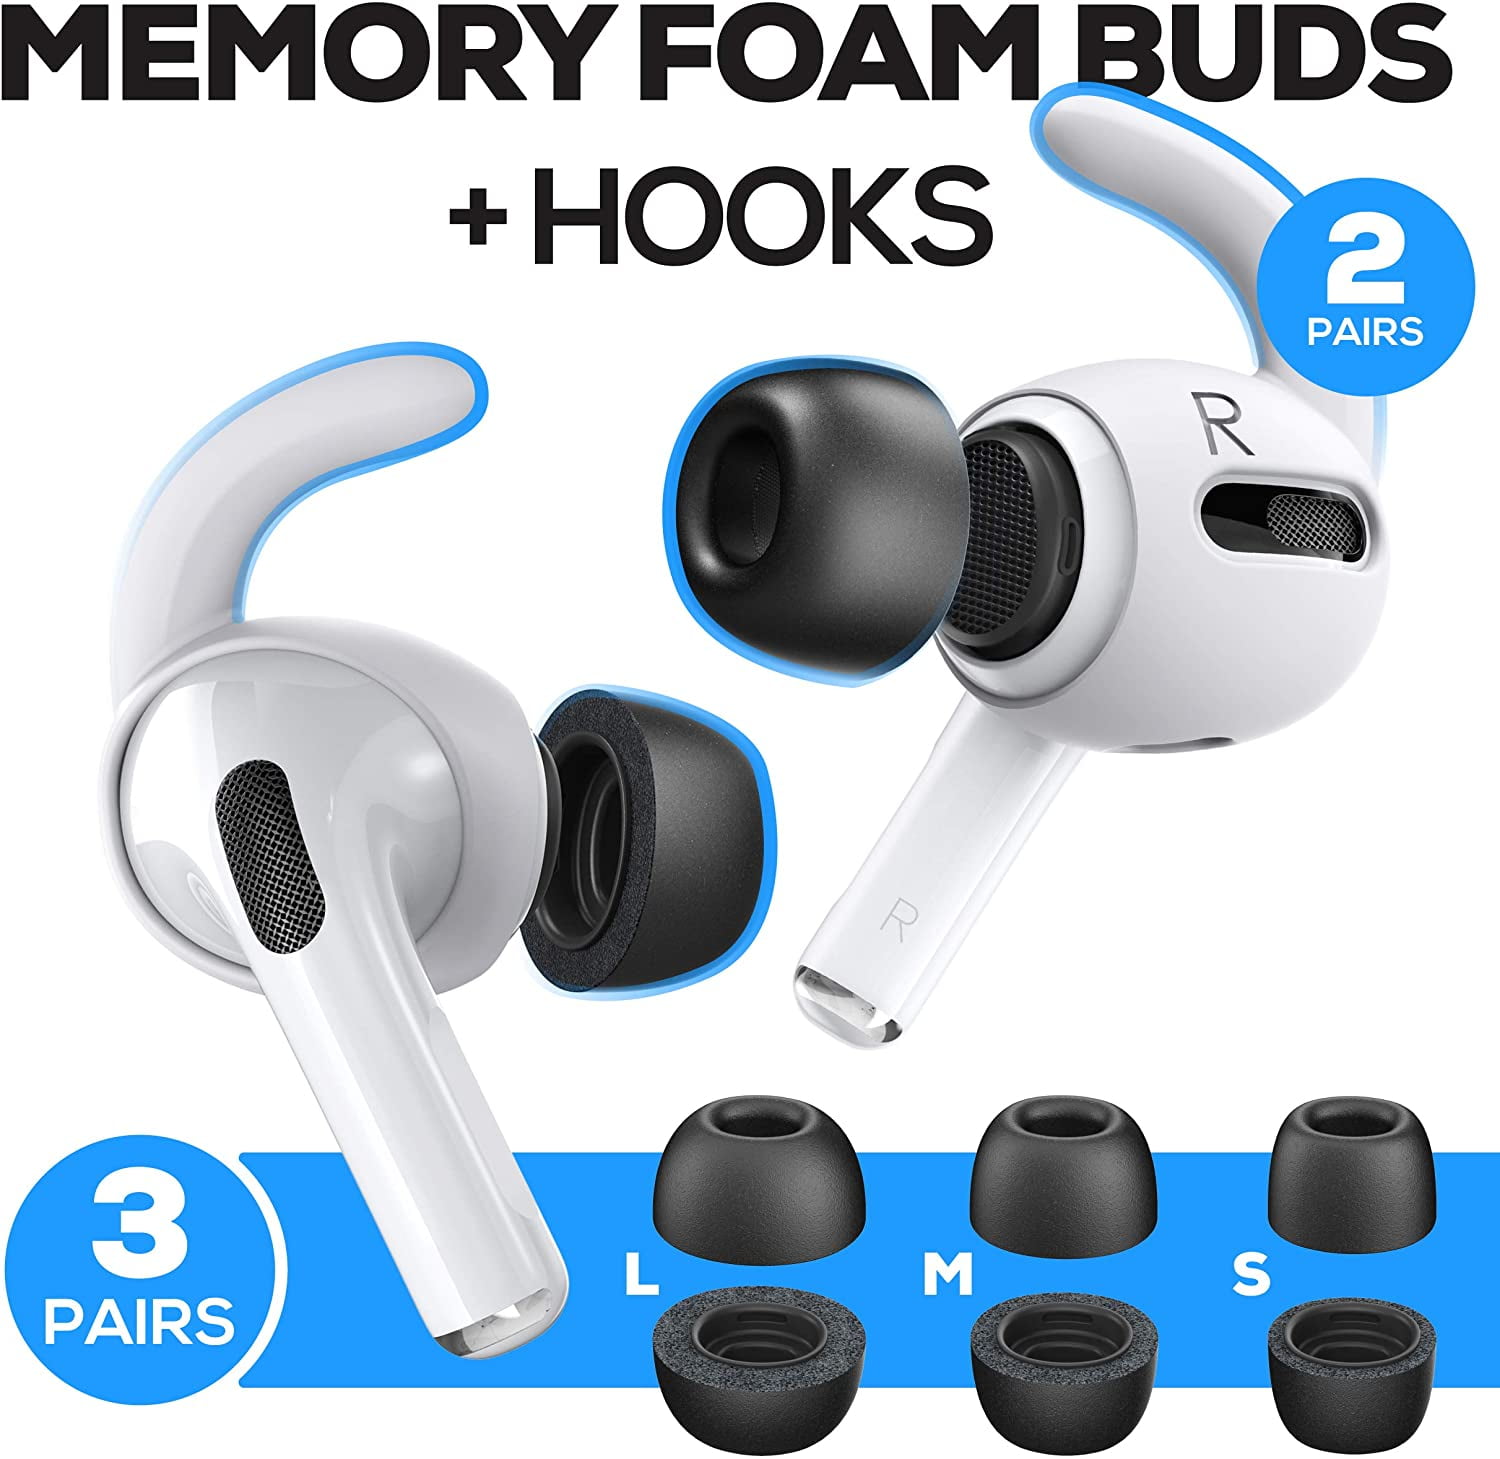 3 Pairs White Hooks Ear Hooks Accessorie for AirPods Pro and Memory Foam Ear Tips 3 Pairs S, M, L Black Buds for AirPods Pro